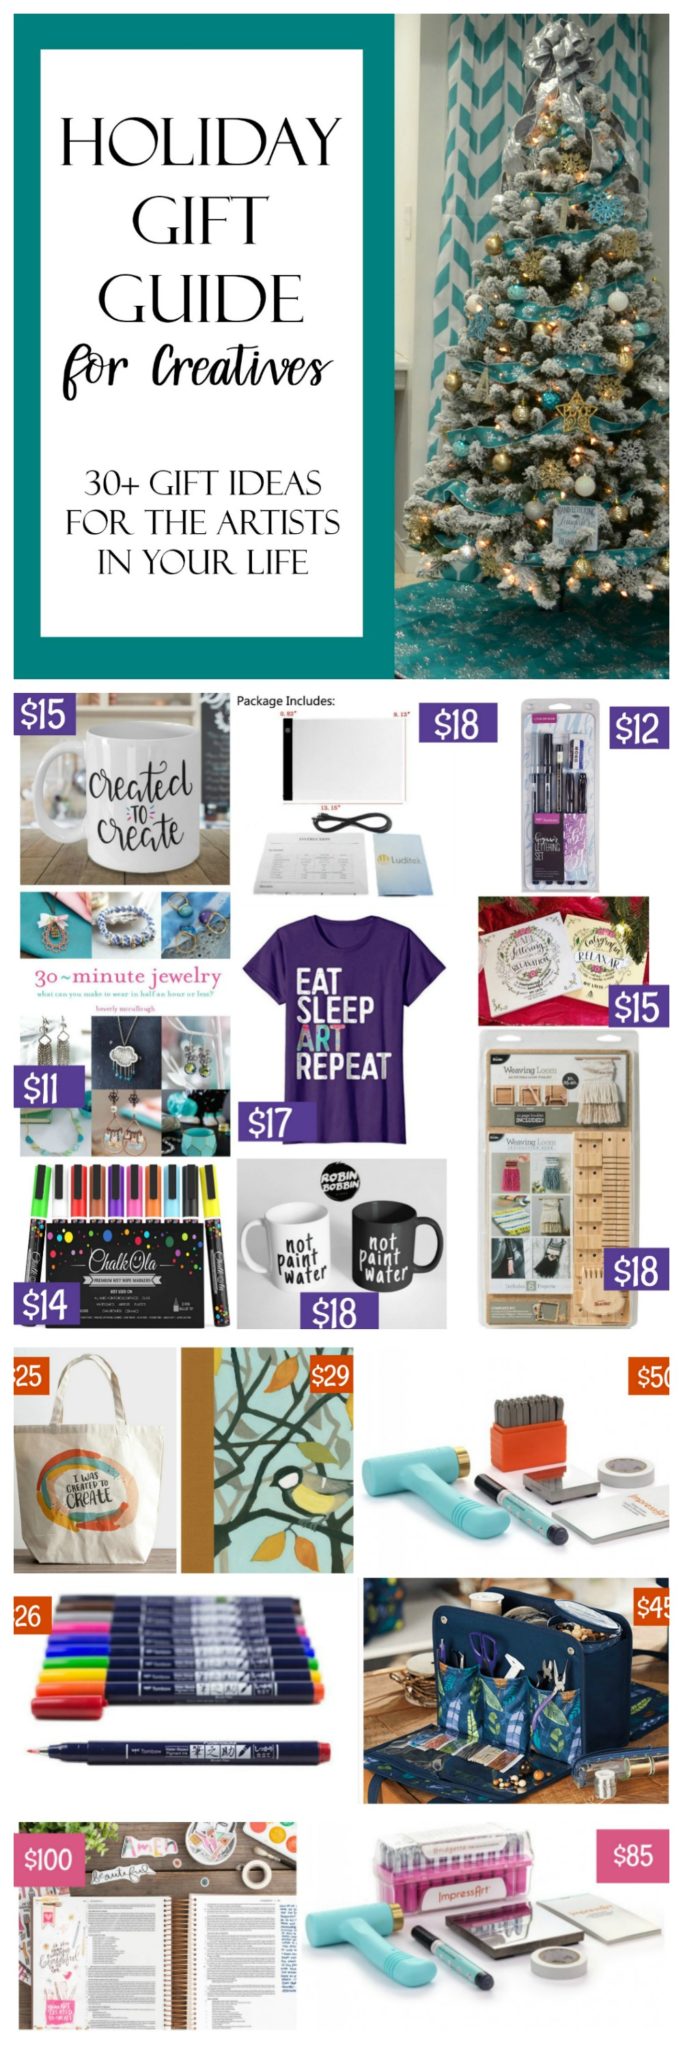 Holiday Gift Guide for Creatives